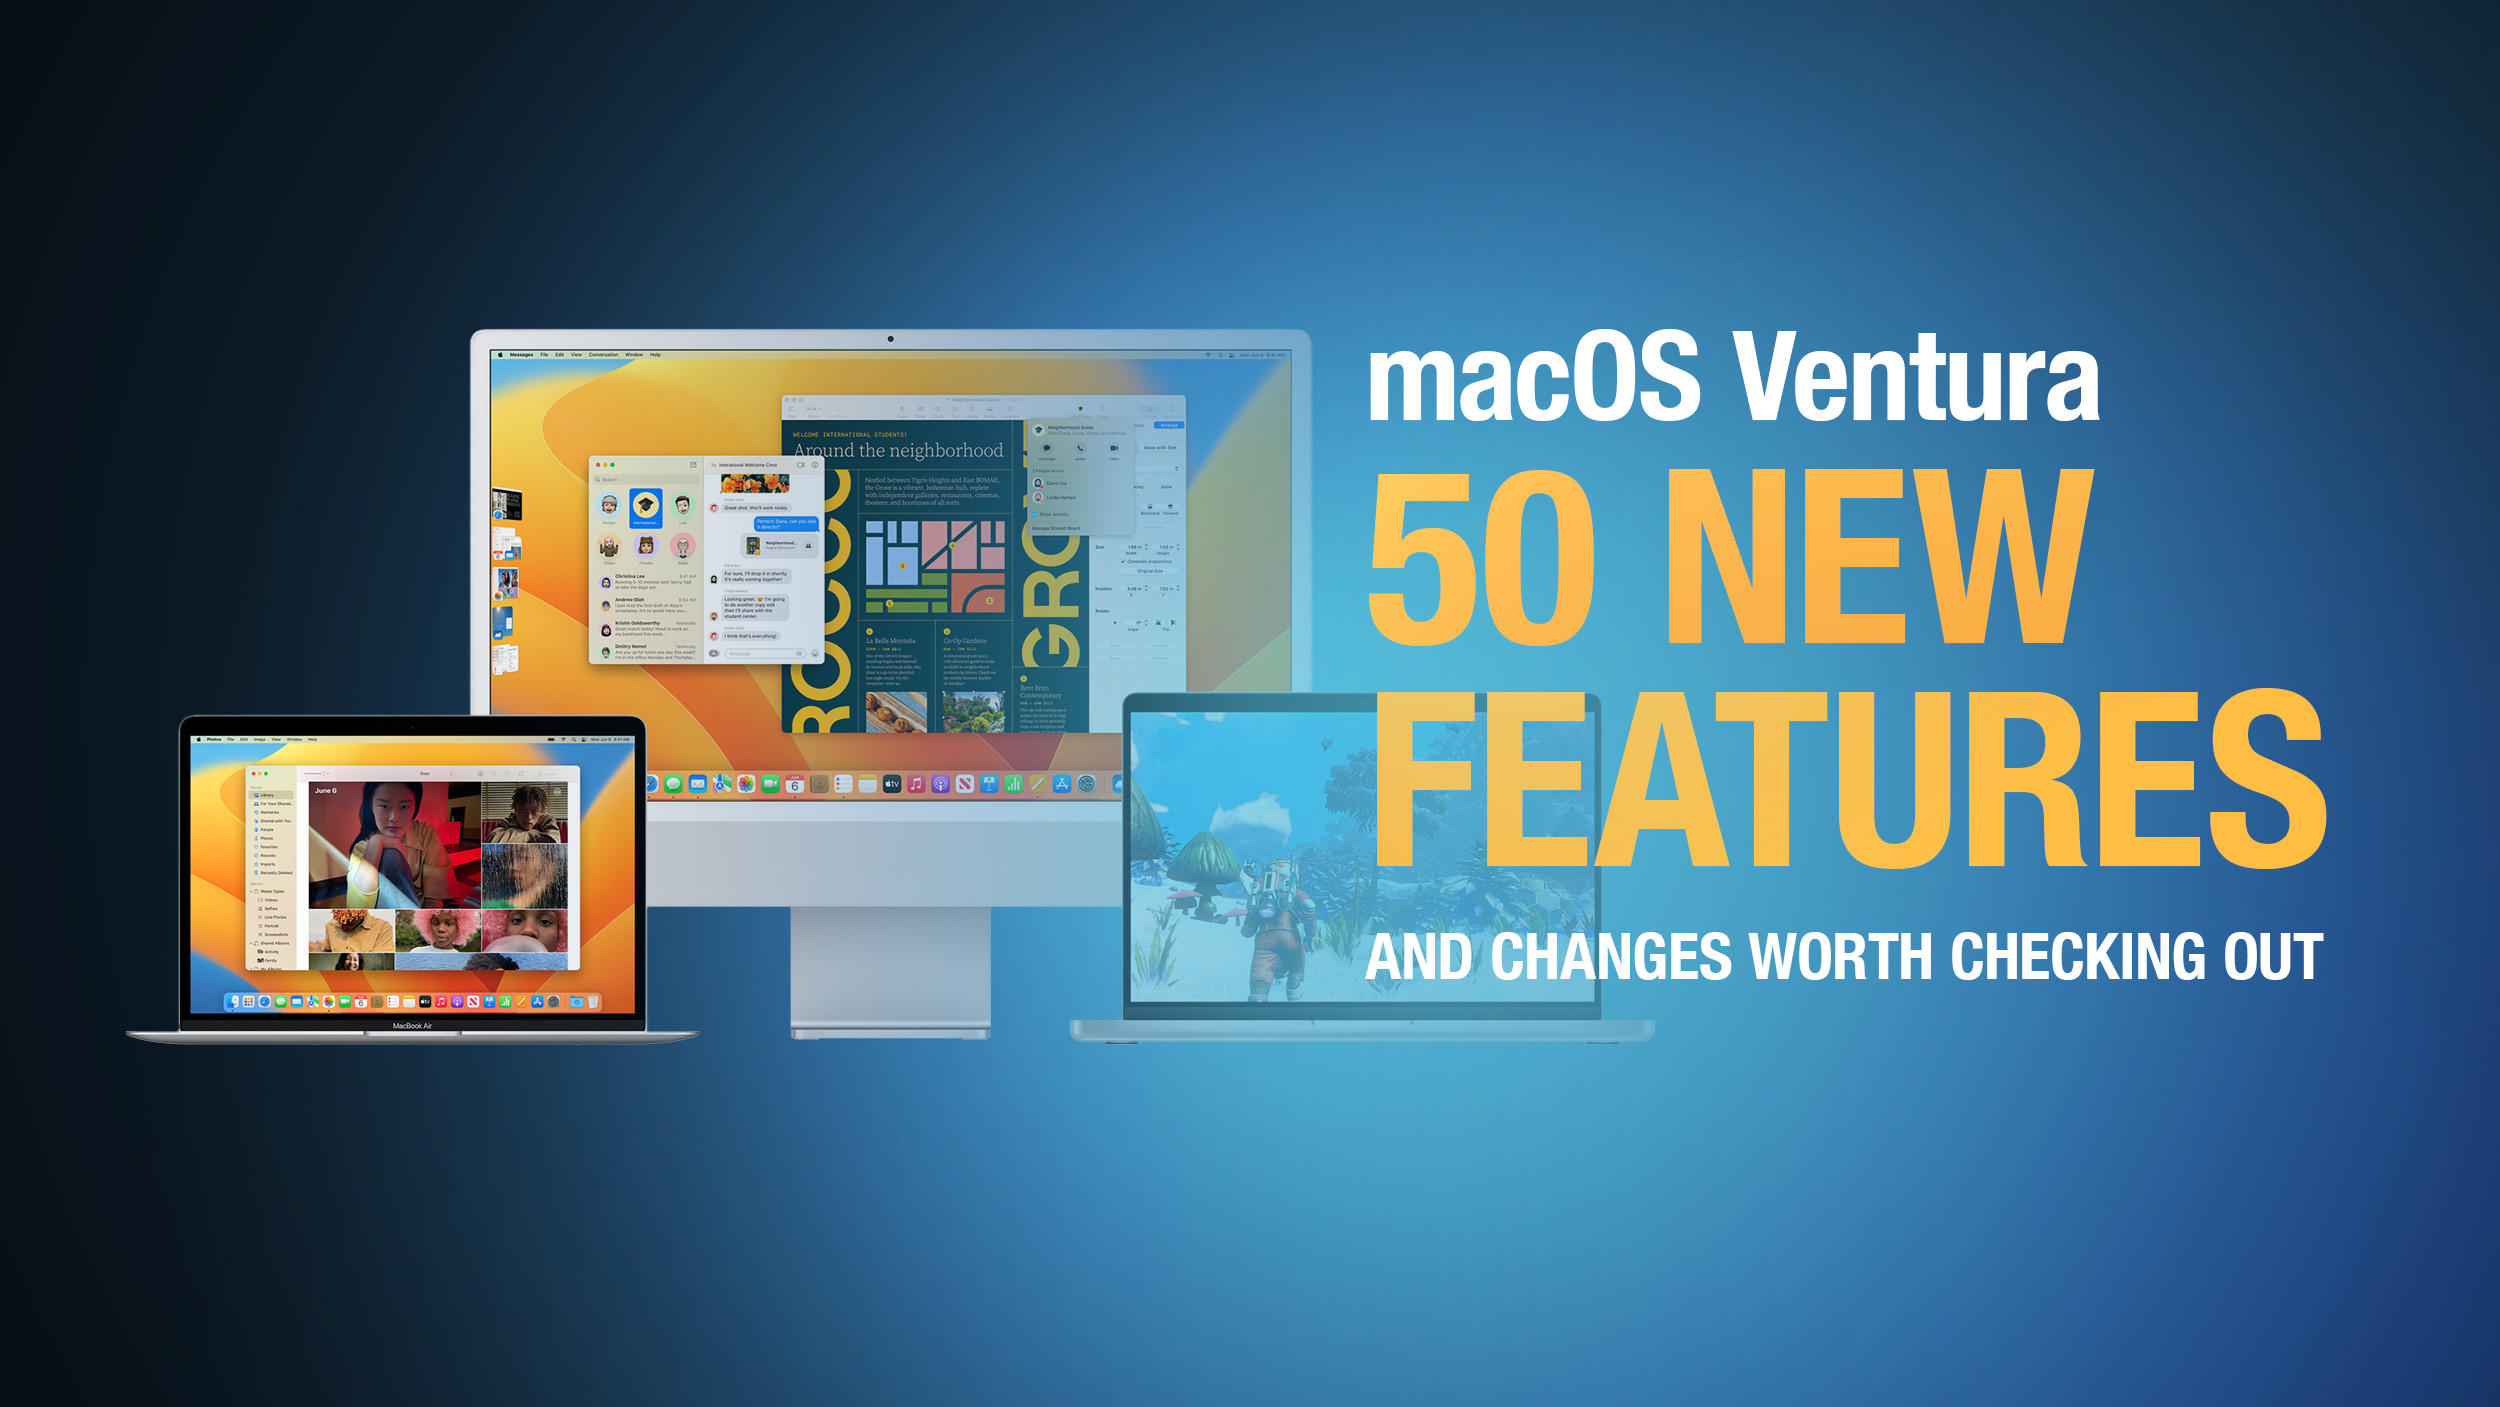 macOS Ventura: 50 New Features and Changes Worth Checking Out